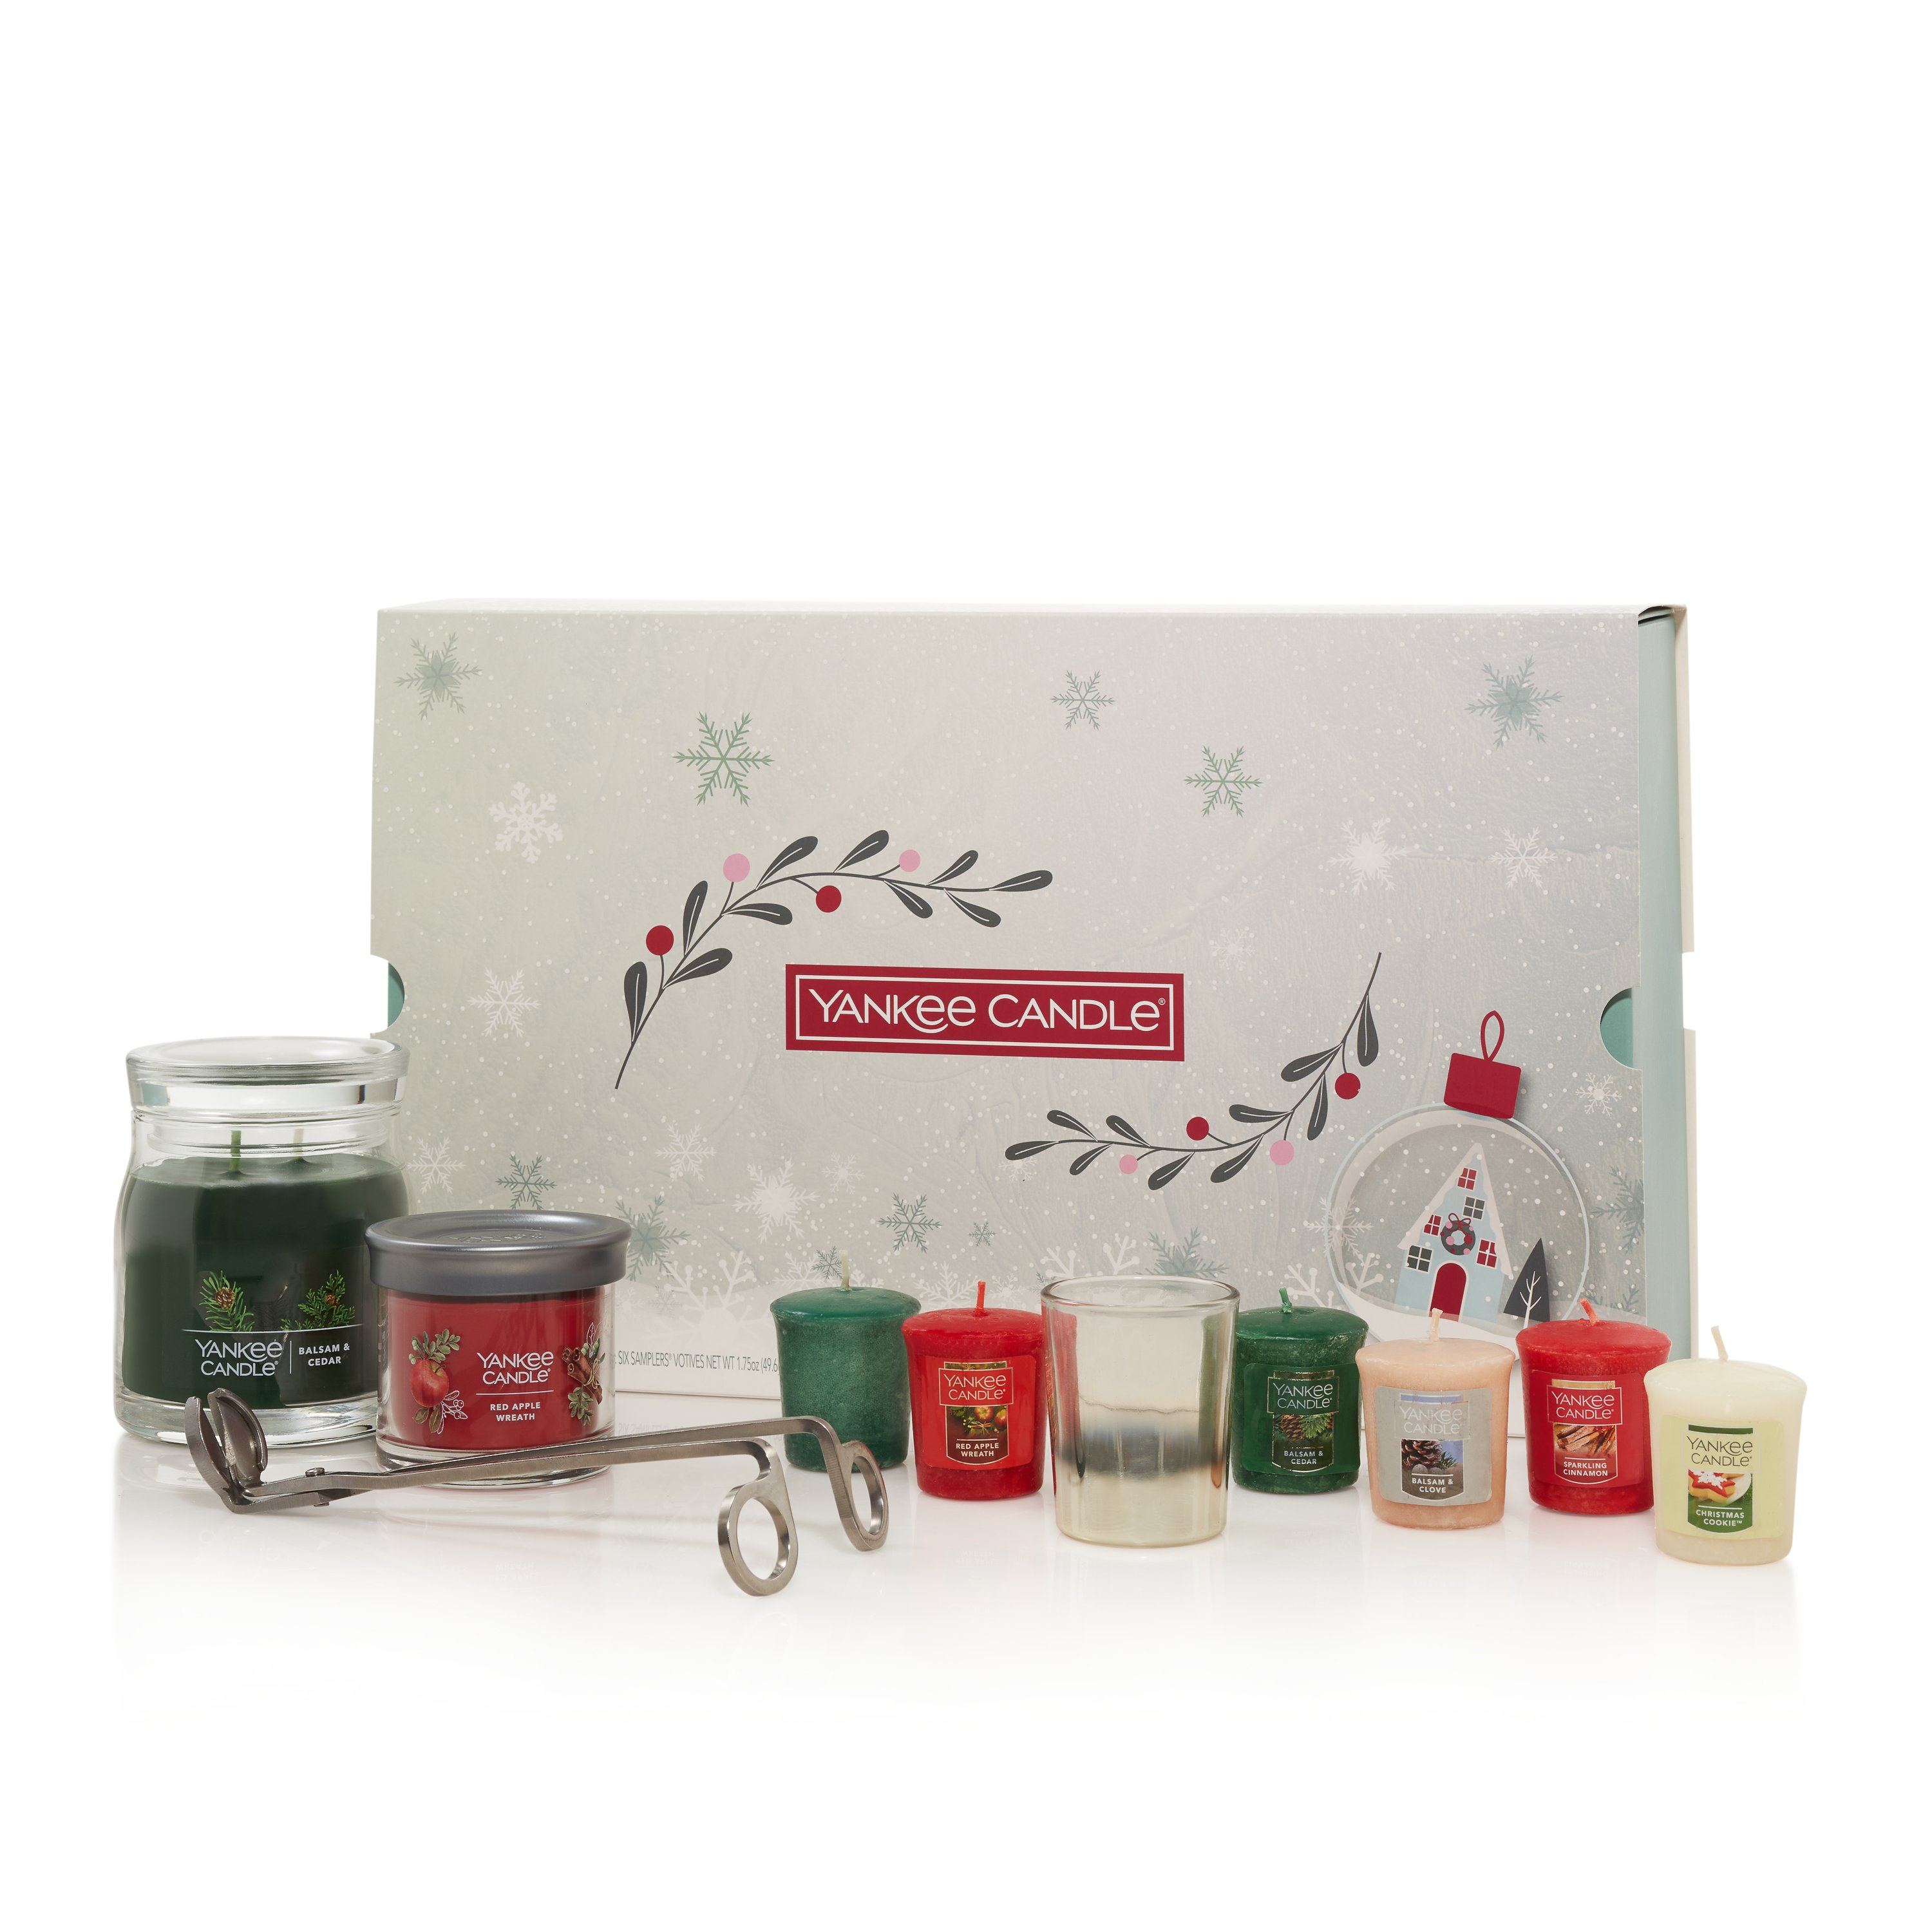 Holiday Signature Candles, Votives, Votive Holder and Wick Trimmer